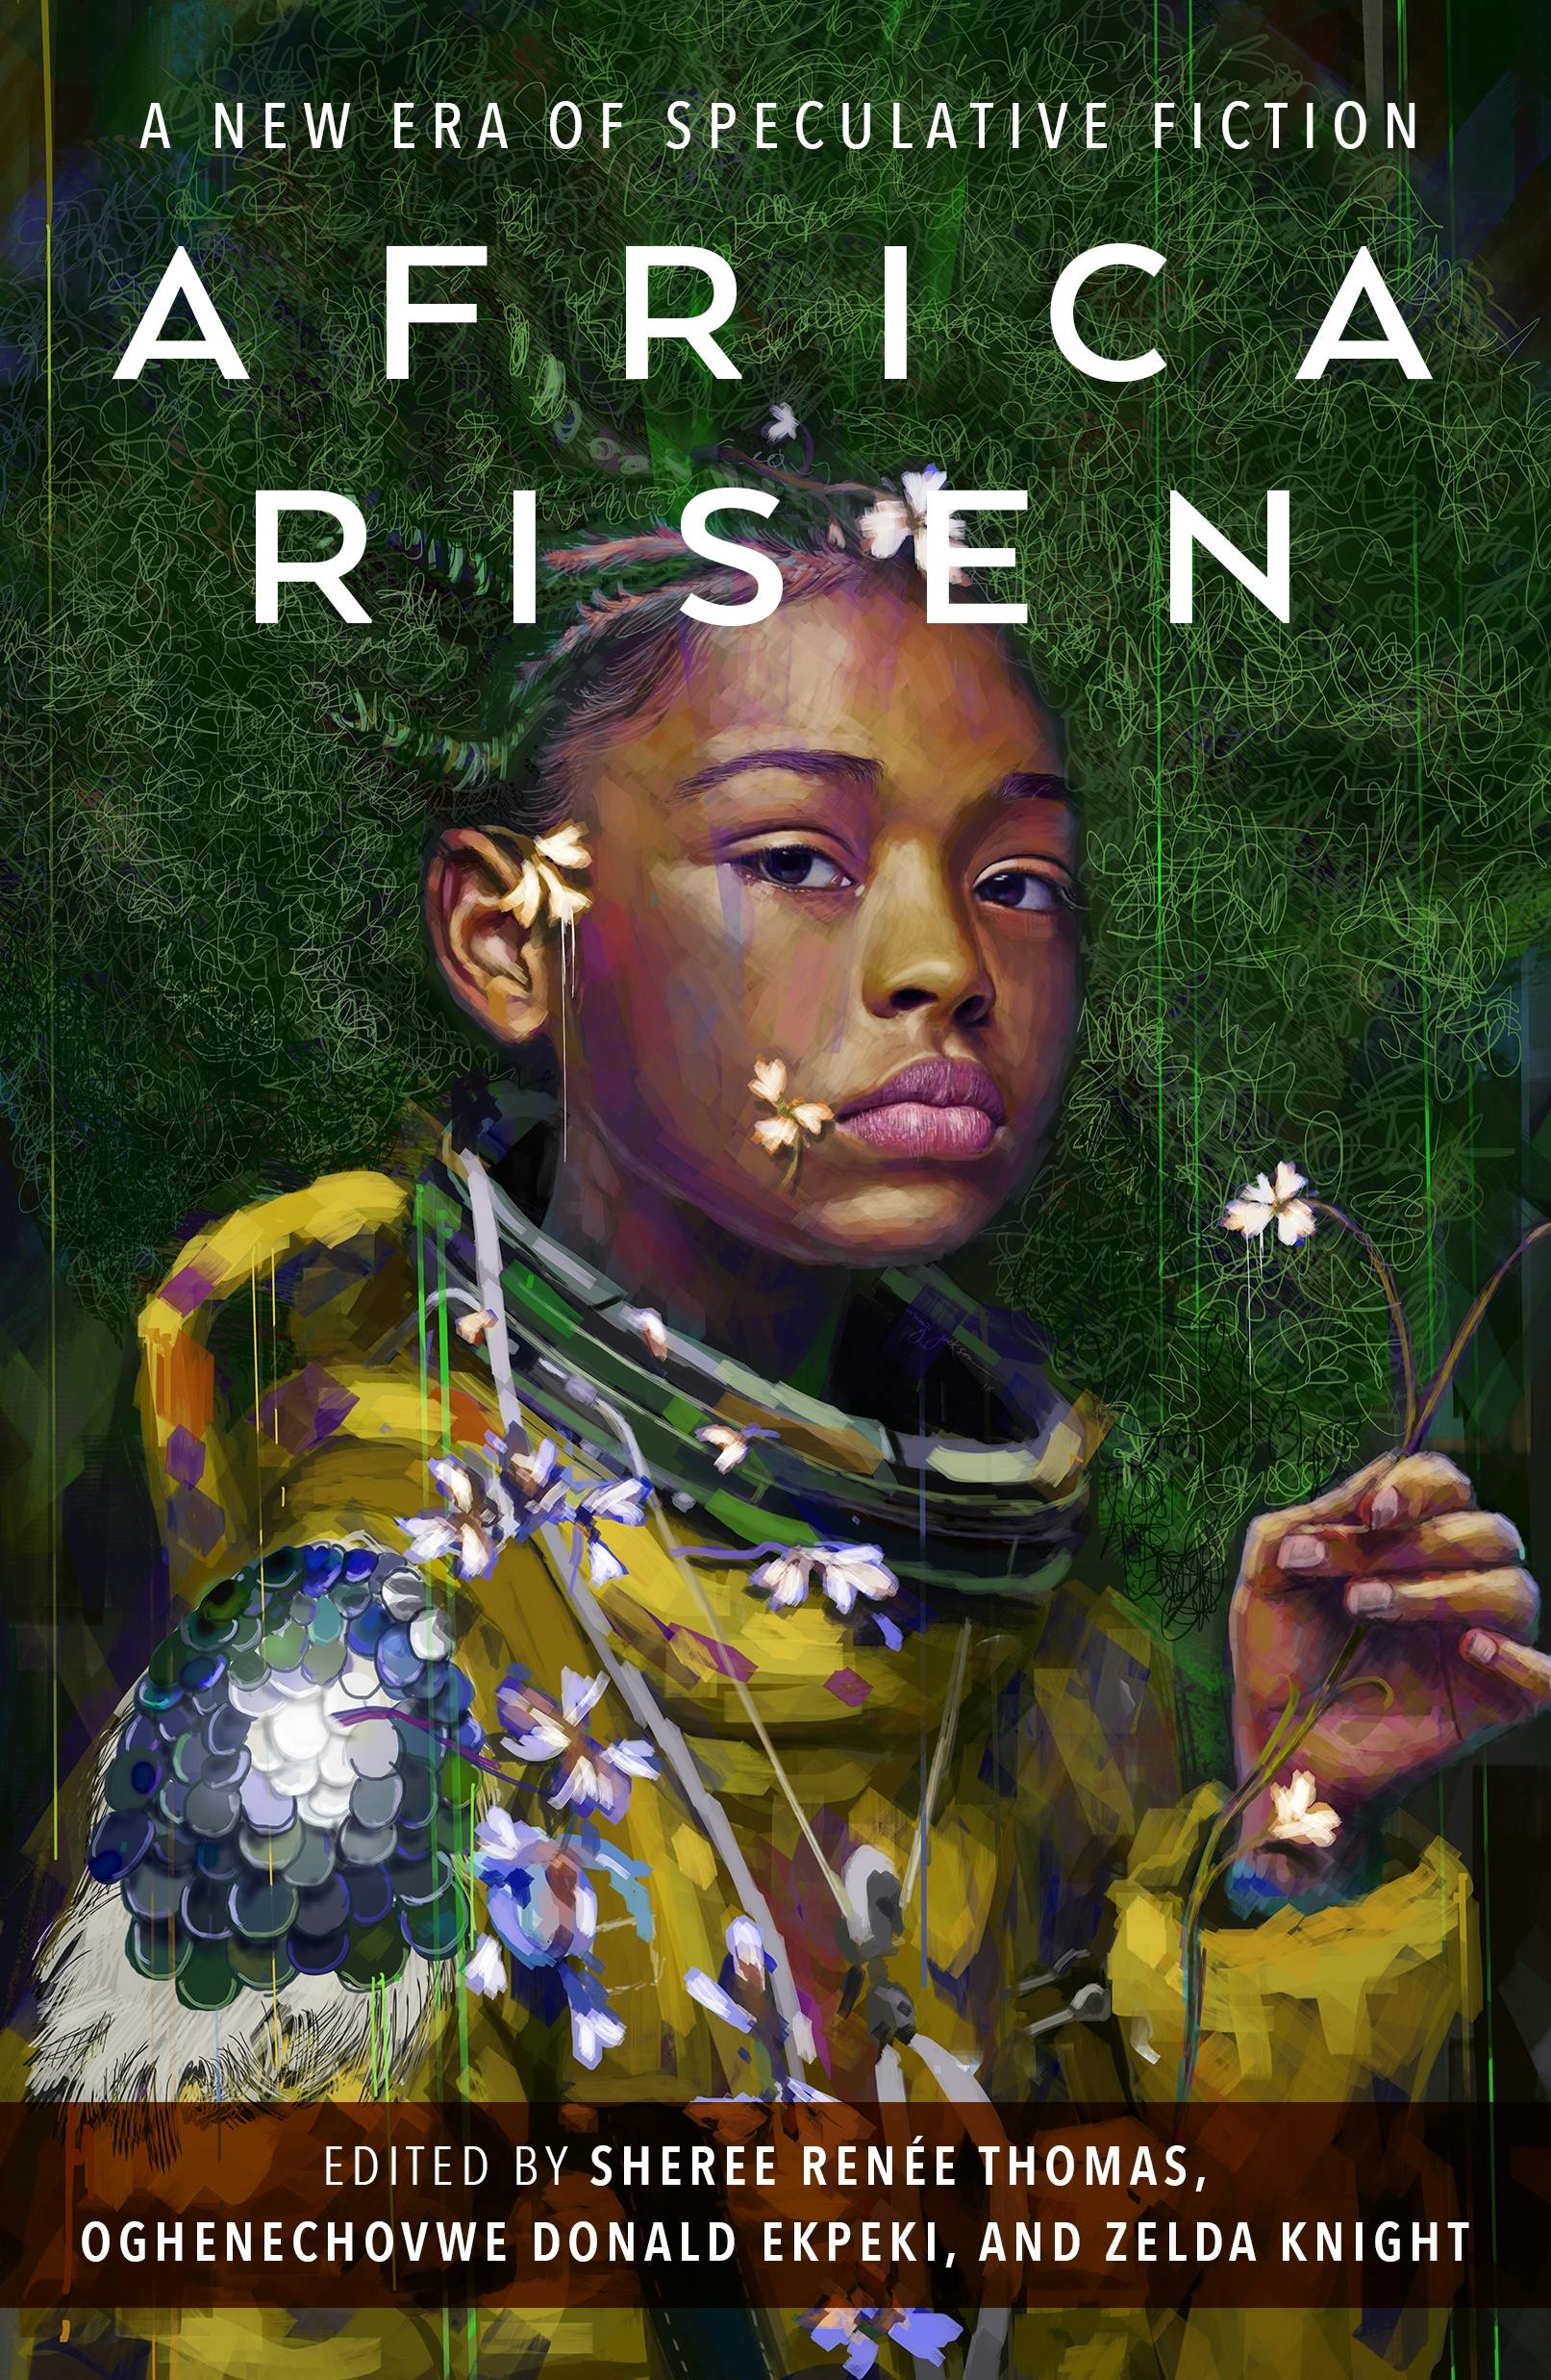 Cover for the book titled as: Africa Risen